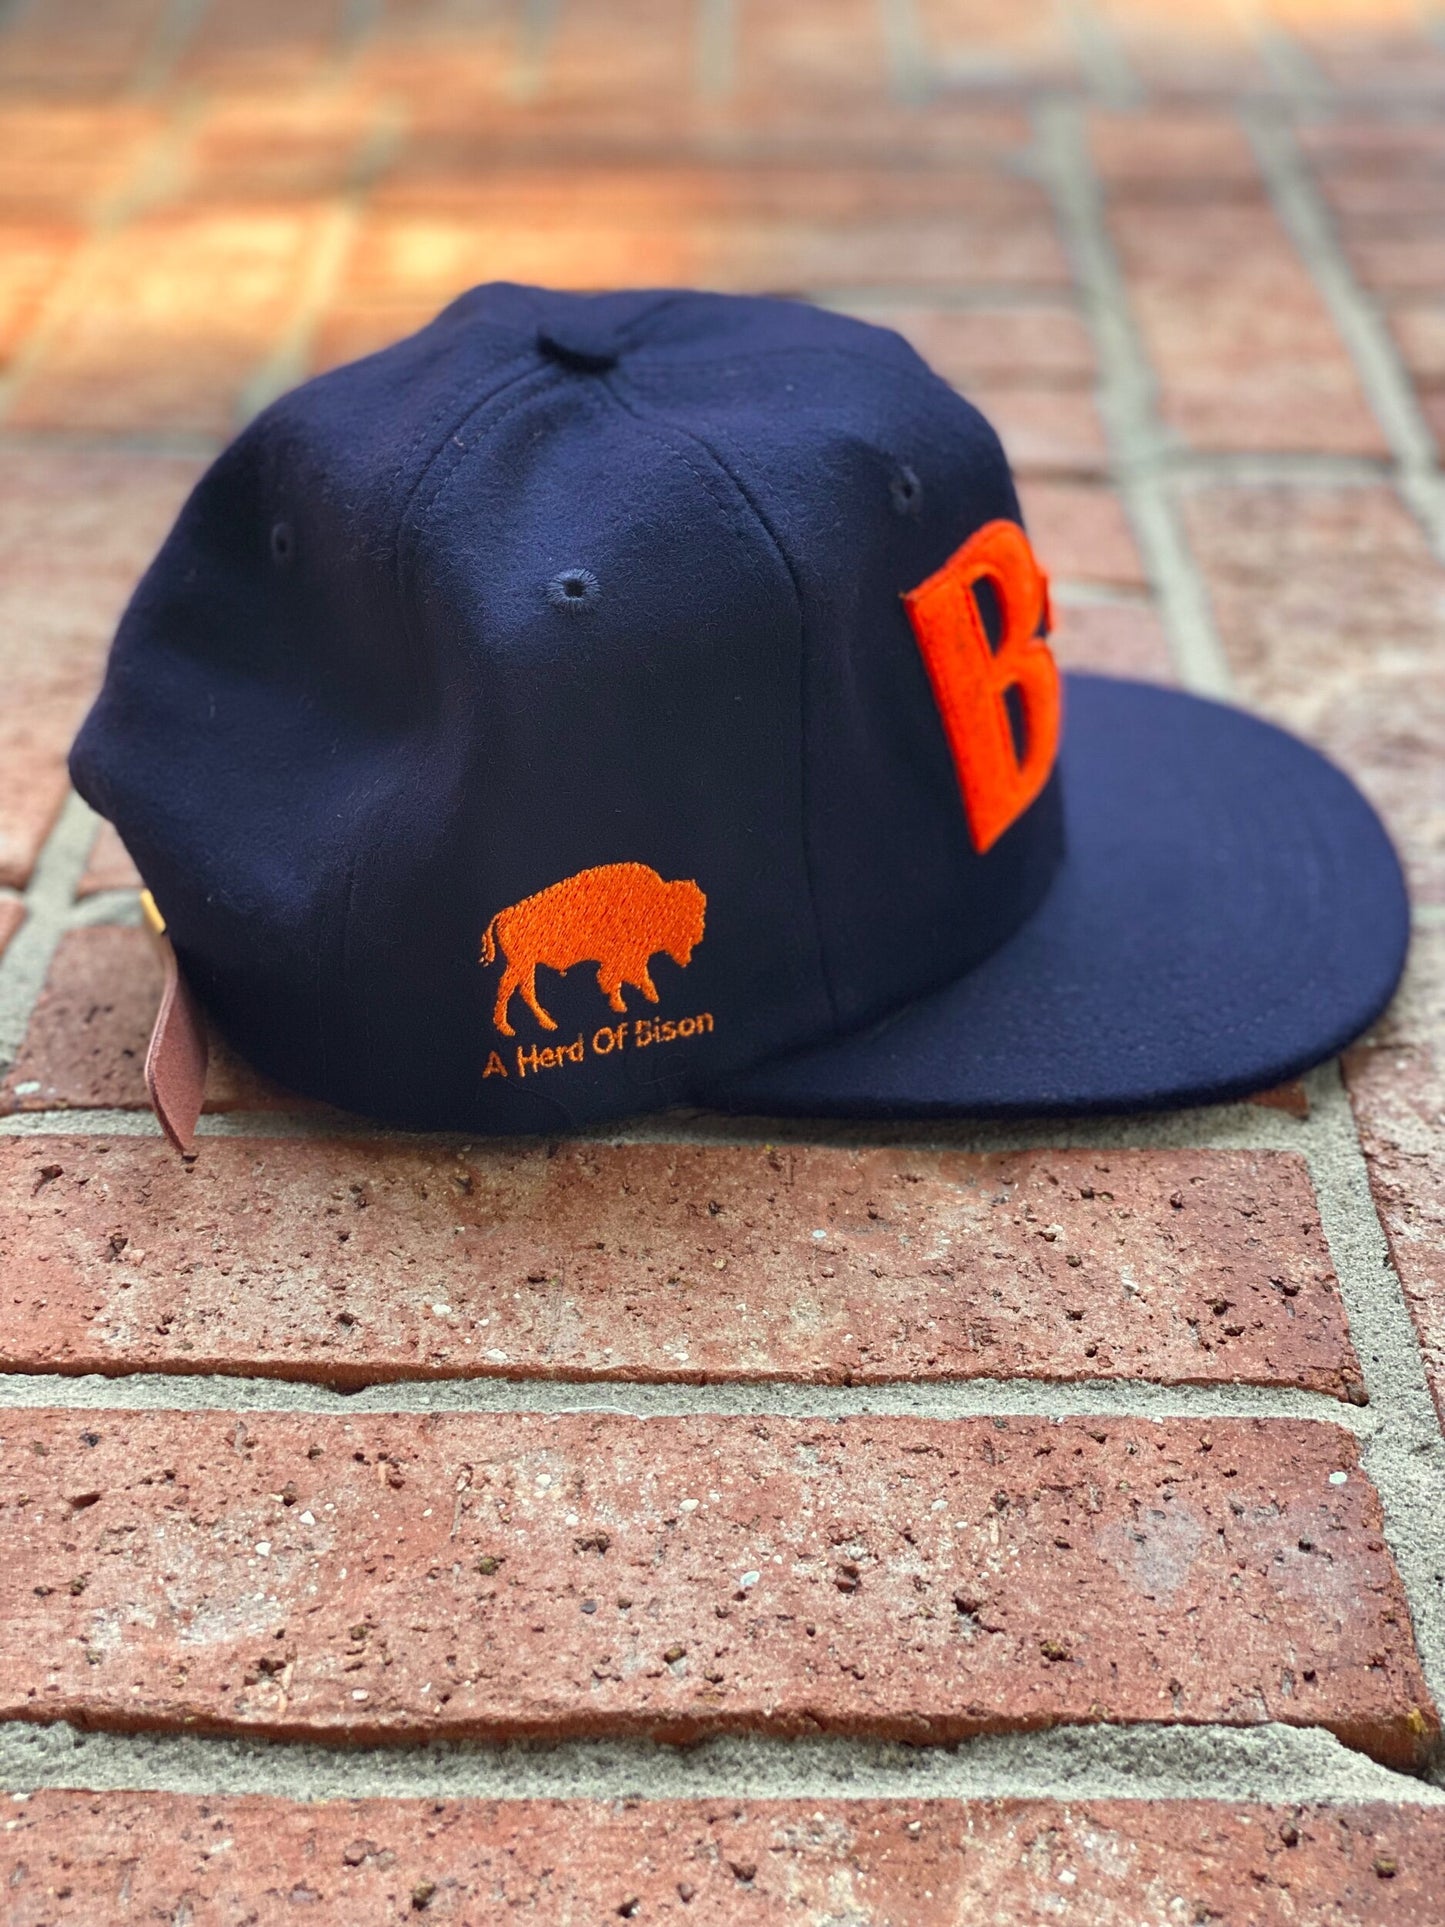 The Ultimate Wool Broadcloth BISON Cap